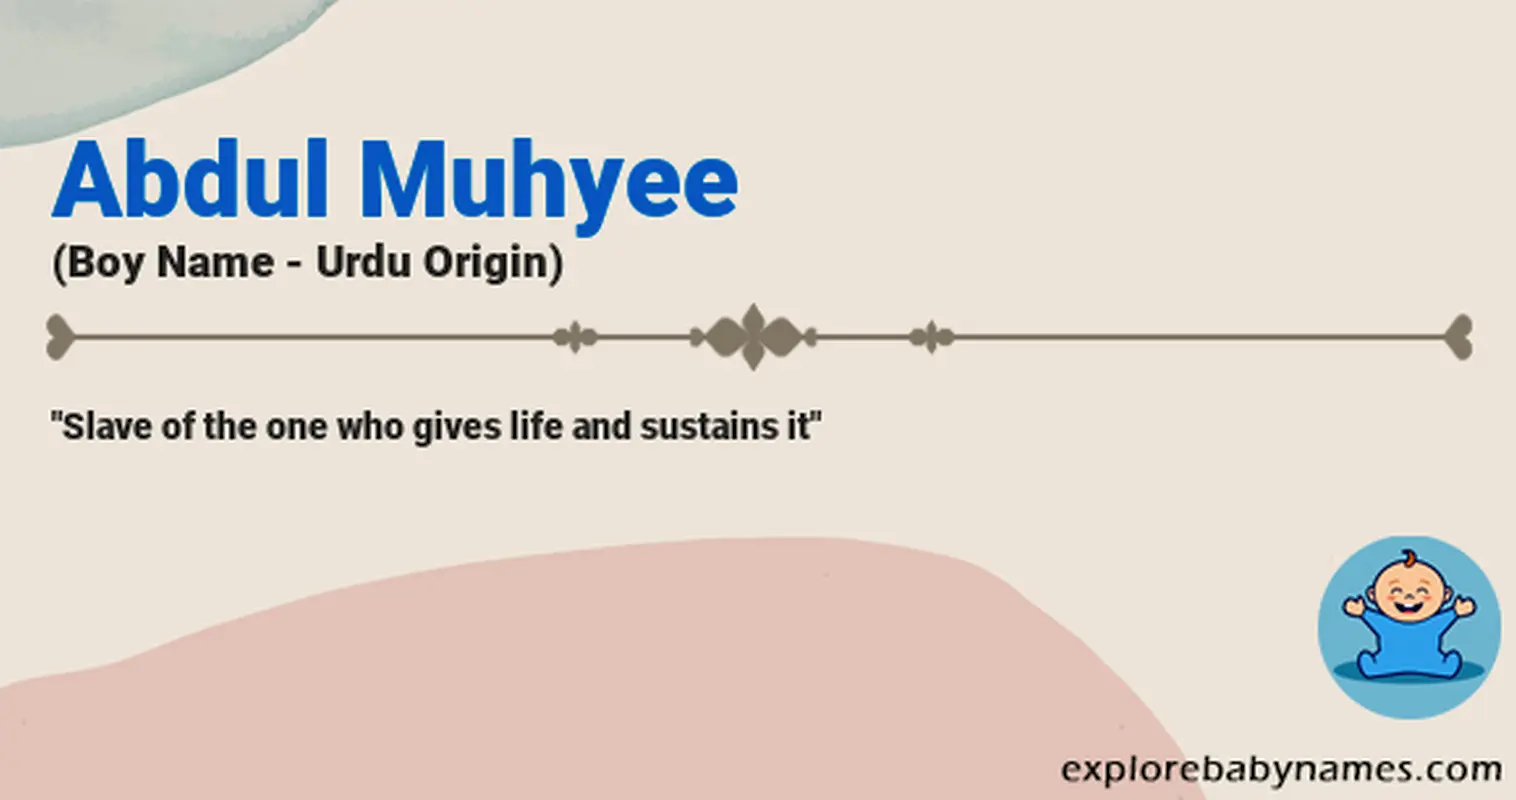 Meaning of Abdul Muhyee